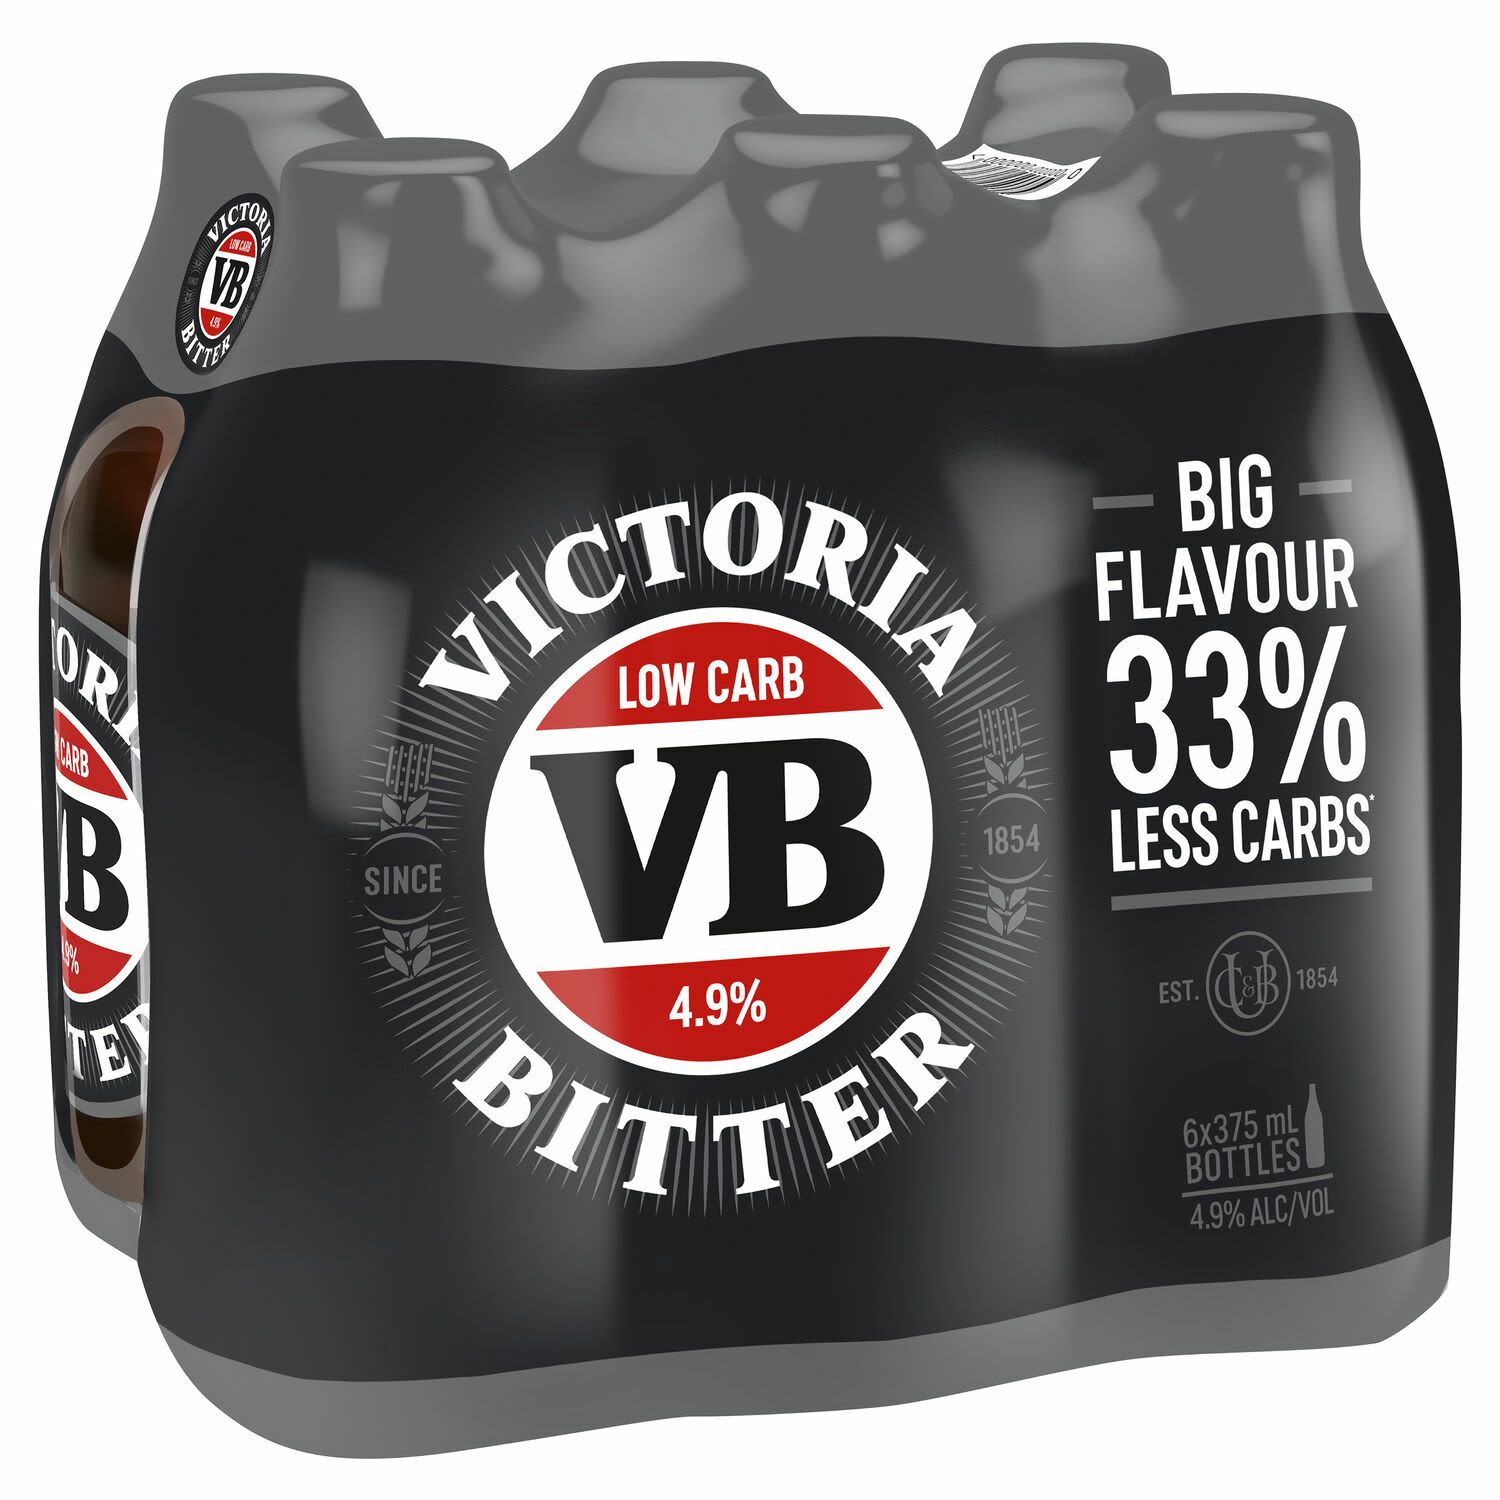 Victoria Bitter Low Carb Bottle 375mL 6 Pack